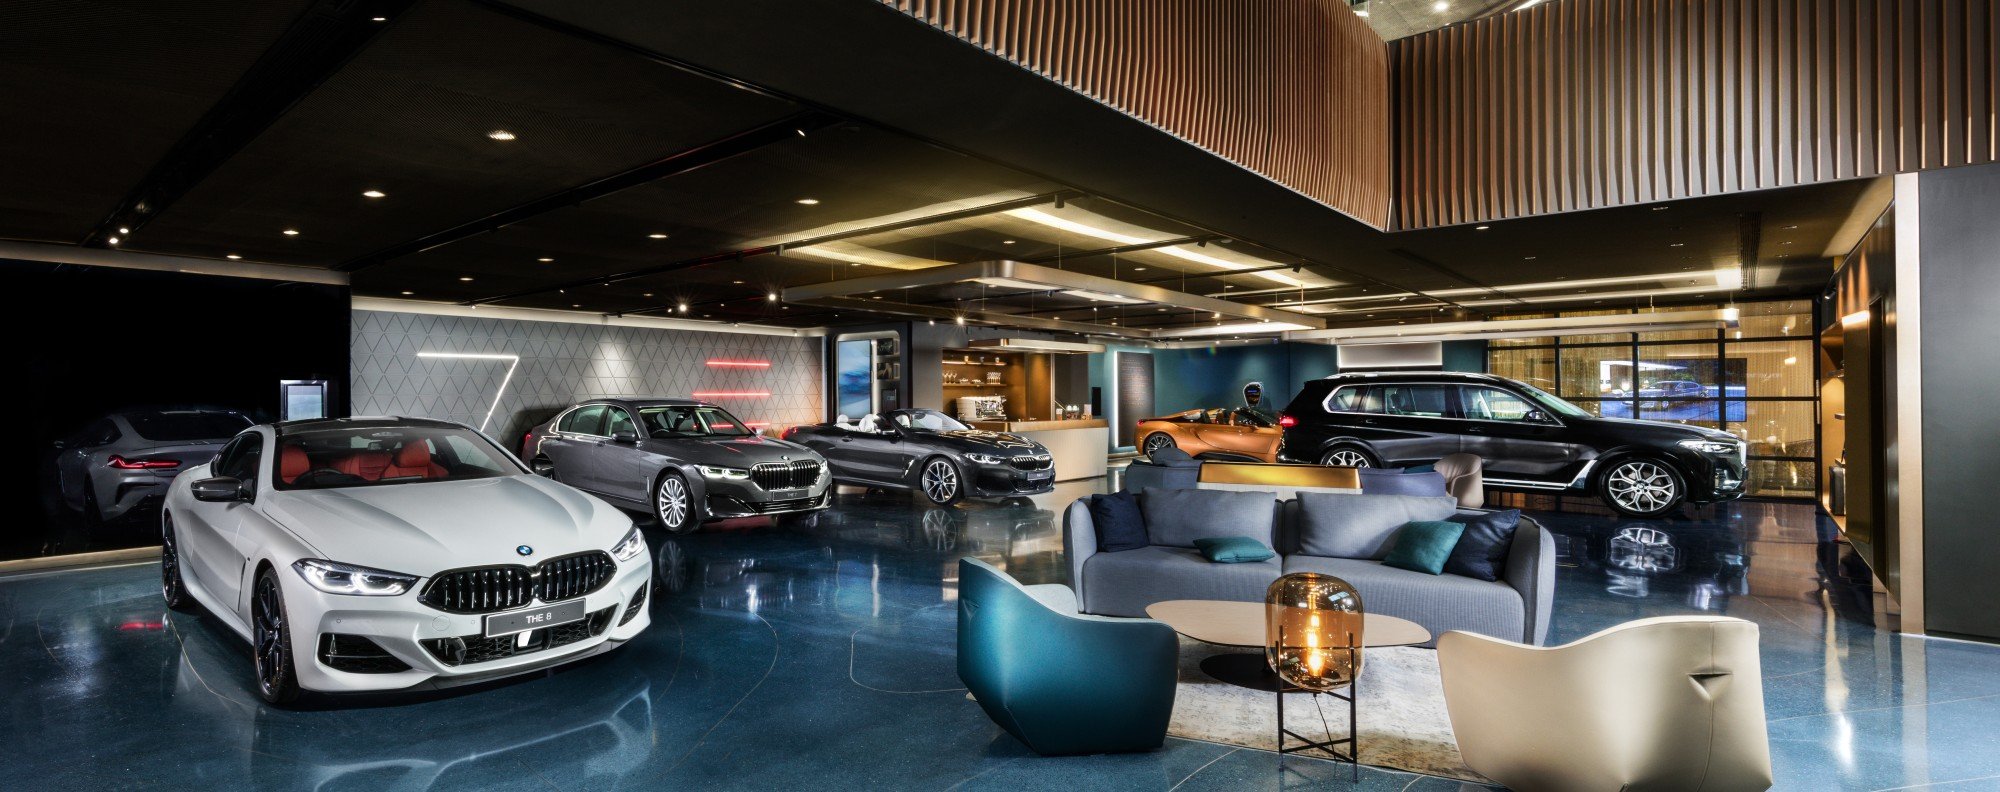 BMW's new flagship showroom for luxury cars — a meticulously